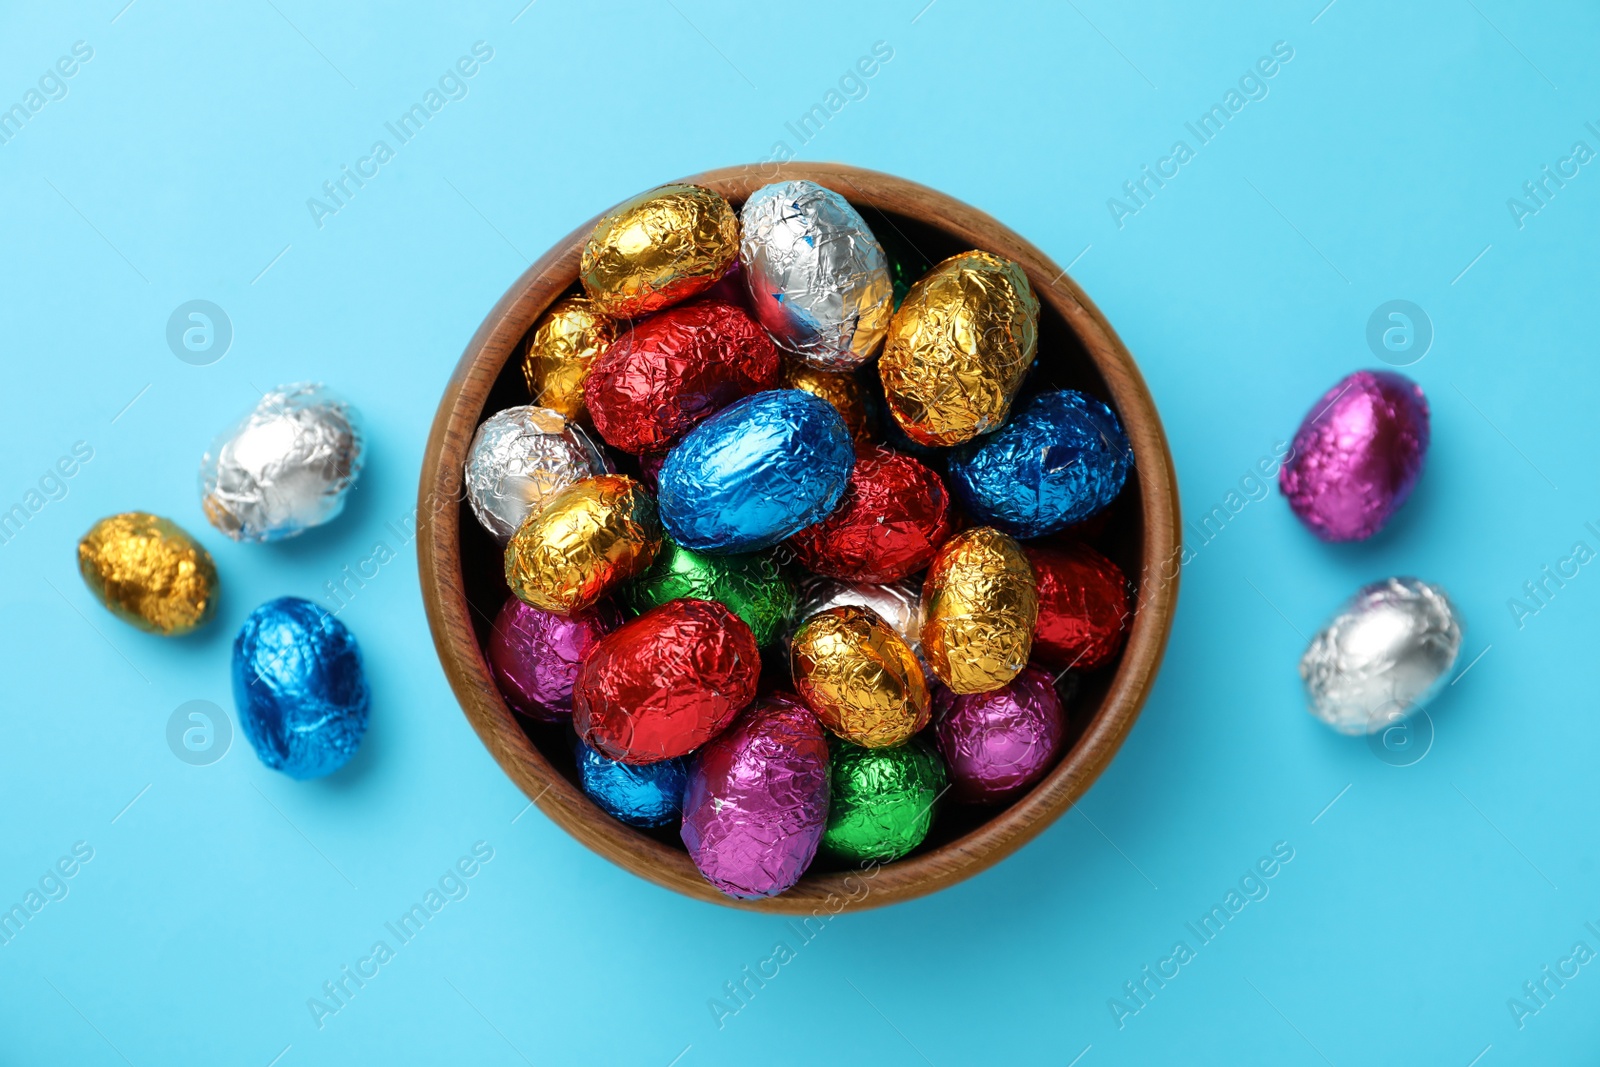 Photo of Wooden bowl with chocolate eggs wrapped in colorful foil on light blue background, flat lay